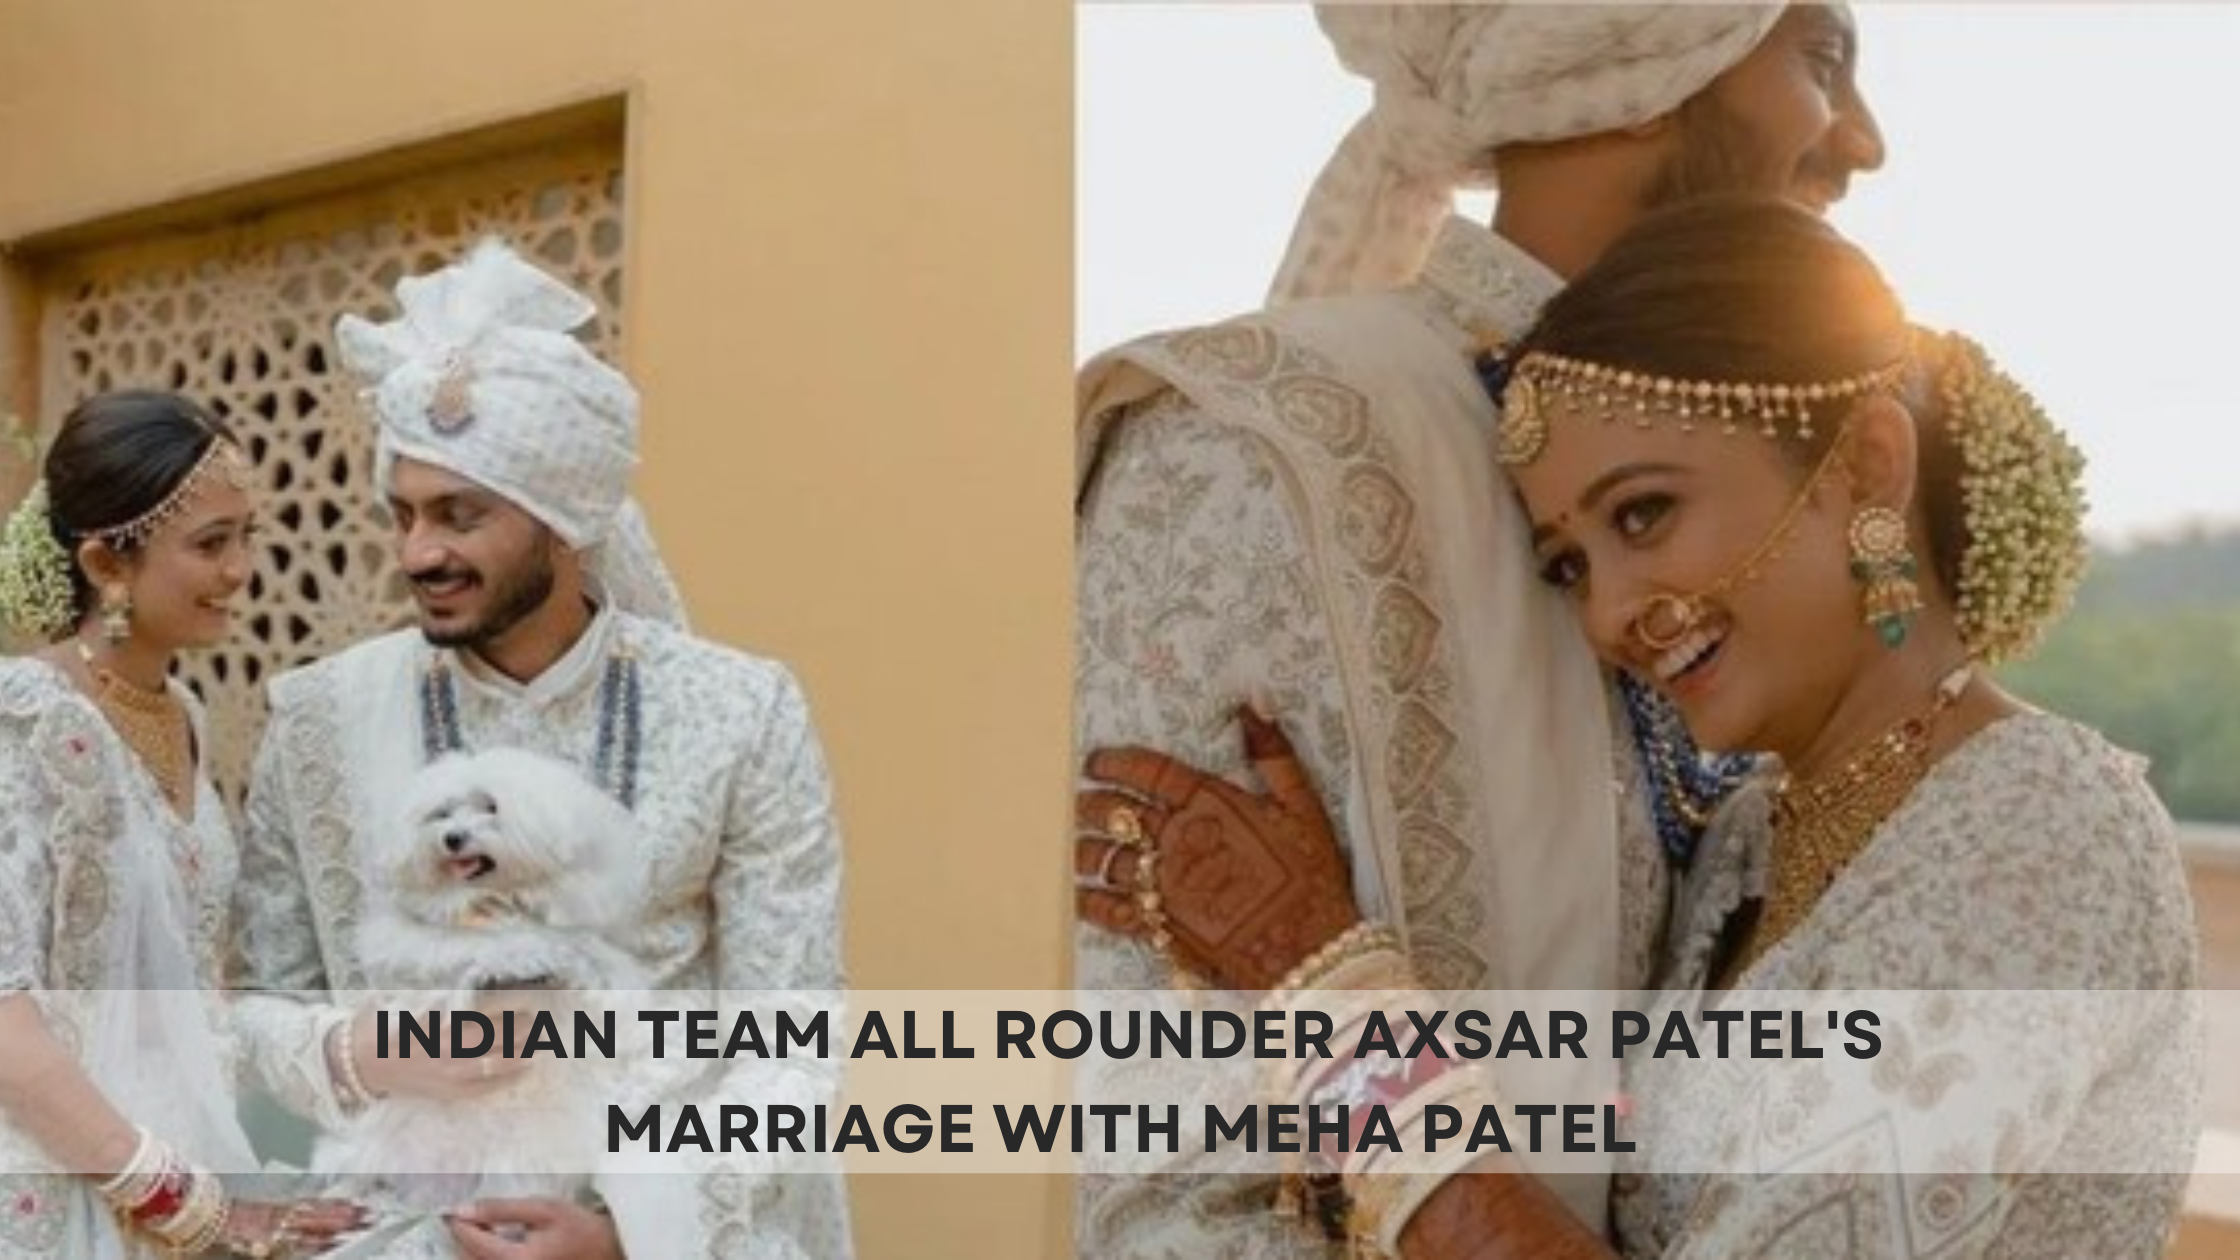 Indian team all rounder Axsar Patel's marriage with Meha Patel